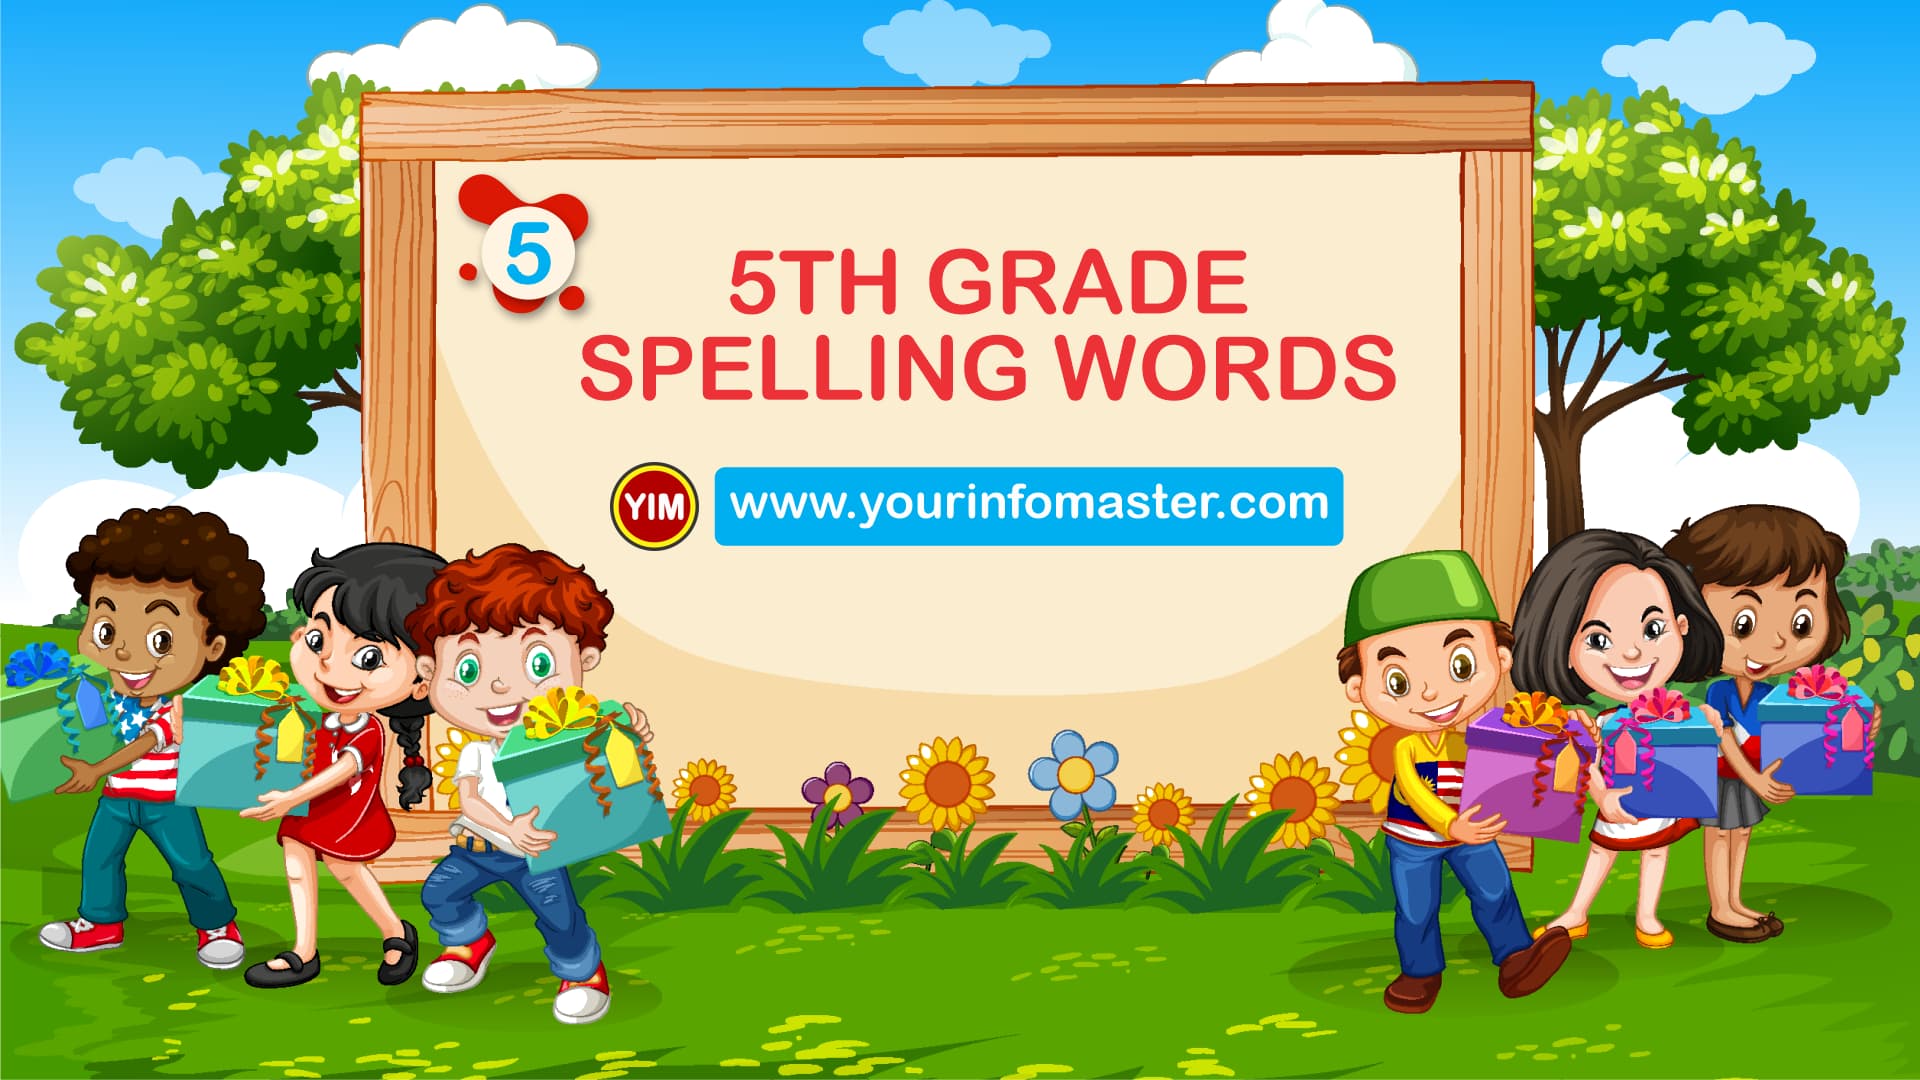 5th grade, 5th grade spelling bee words, 5th grade spelling words, 5th Grade Spelling Words list pdf, awesome words, cool words, examples of 5th Grade Spelling Words, fifth grade vocabulary words, grade 5 spelling words, Learning Spellings, spelling words for 5th grade, vocabulary words, word of the day for kids, Words Bank, Words Worksheets